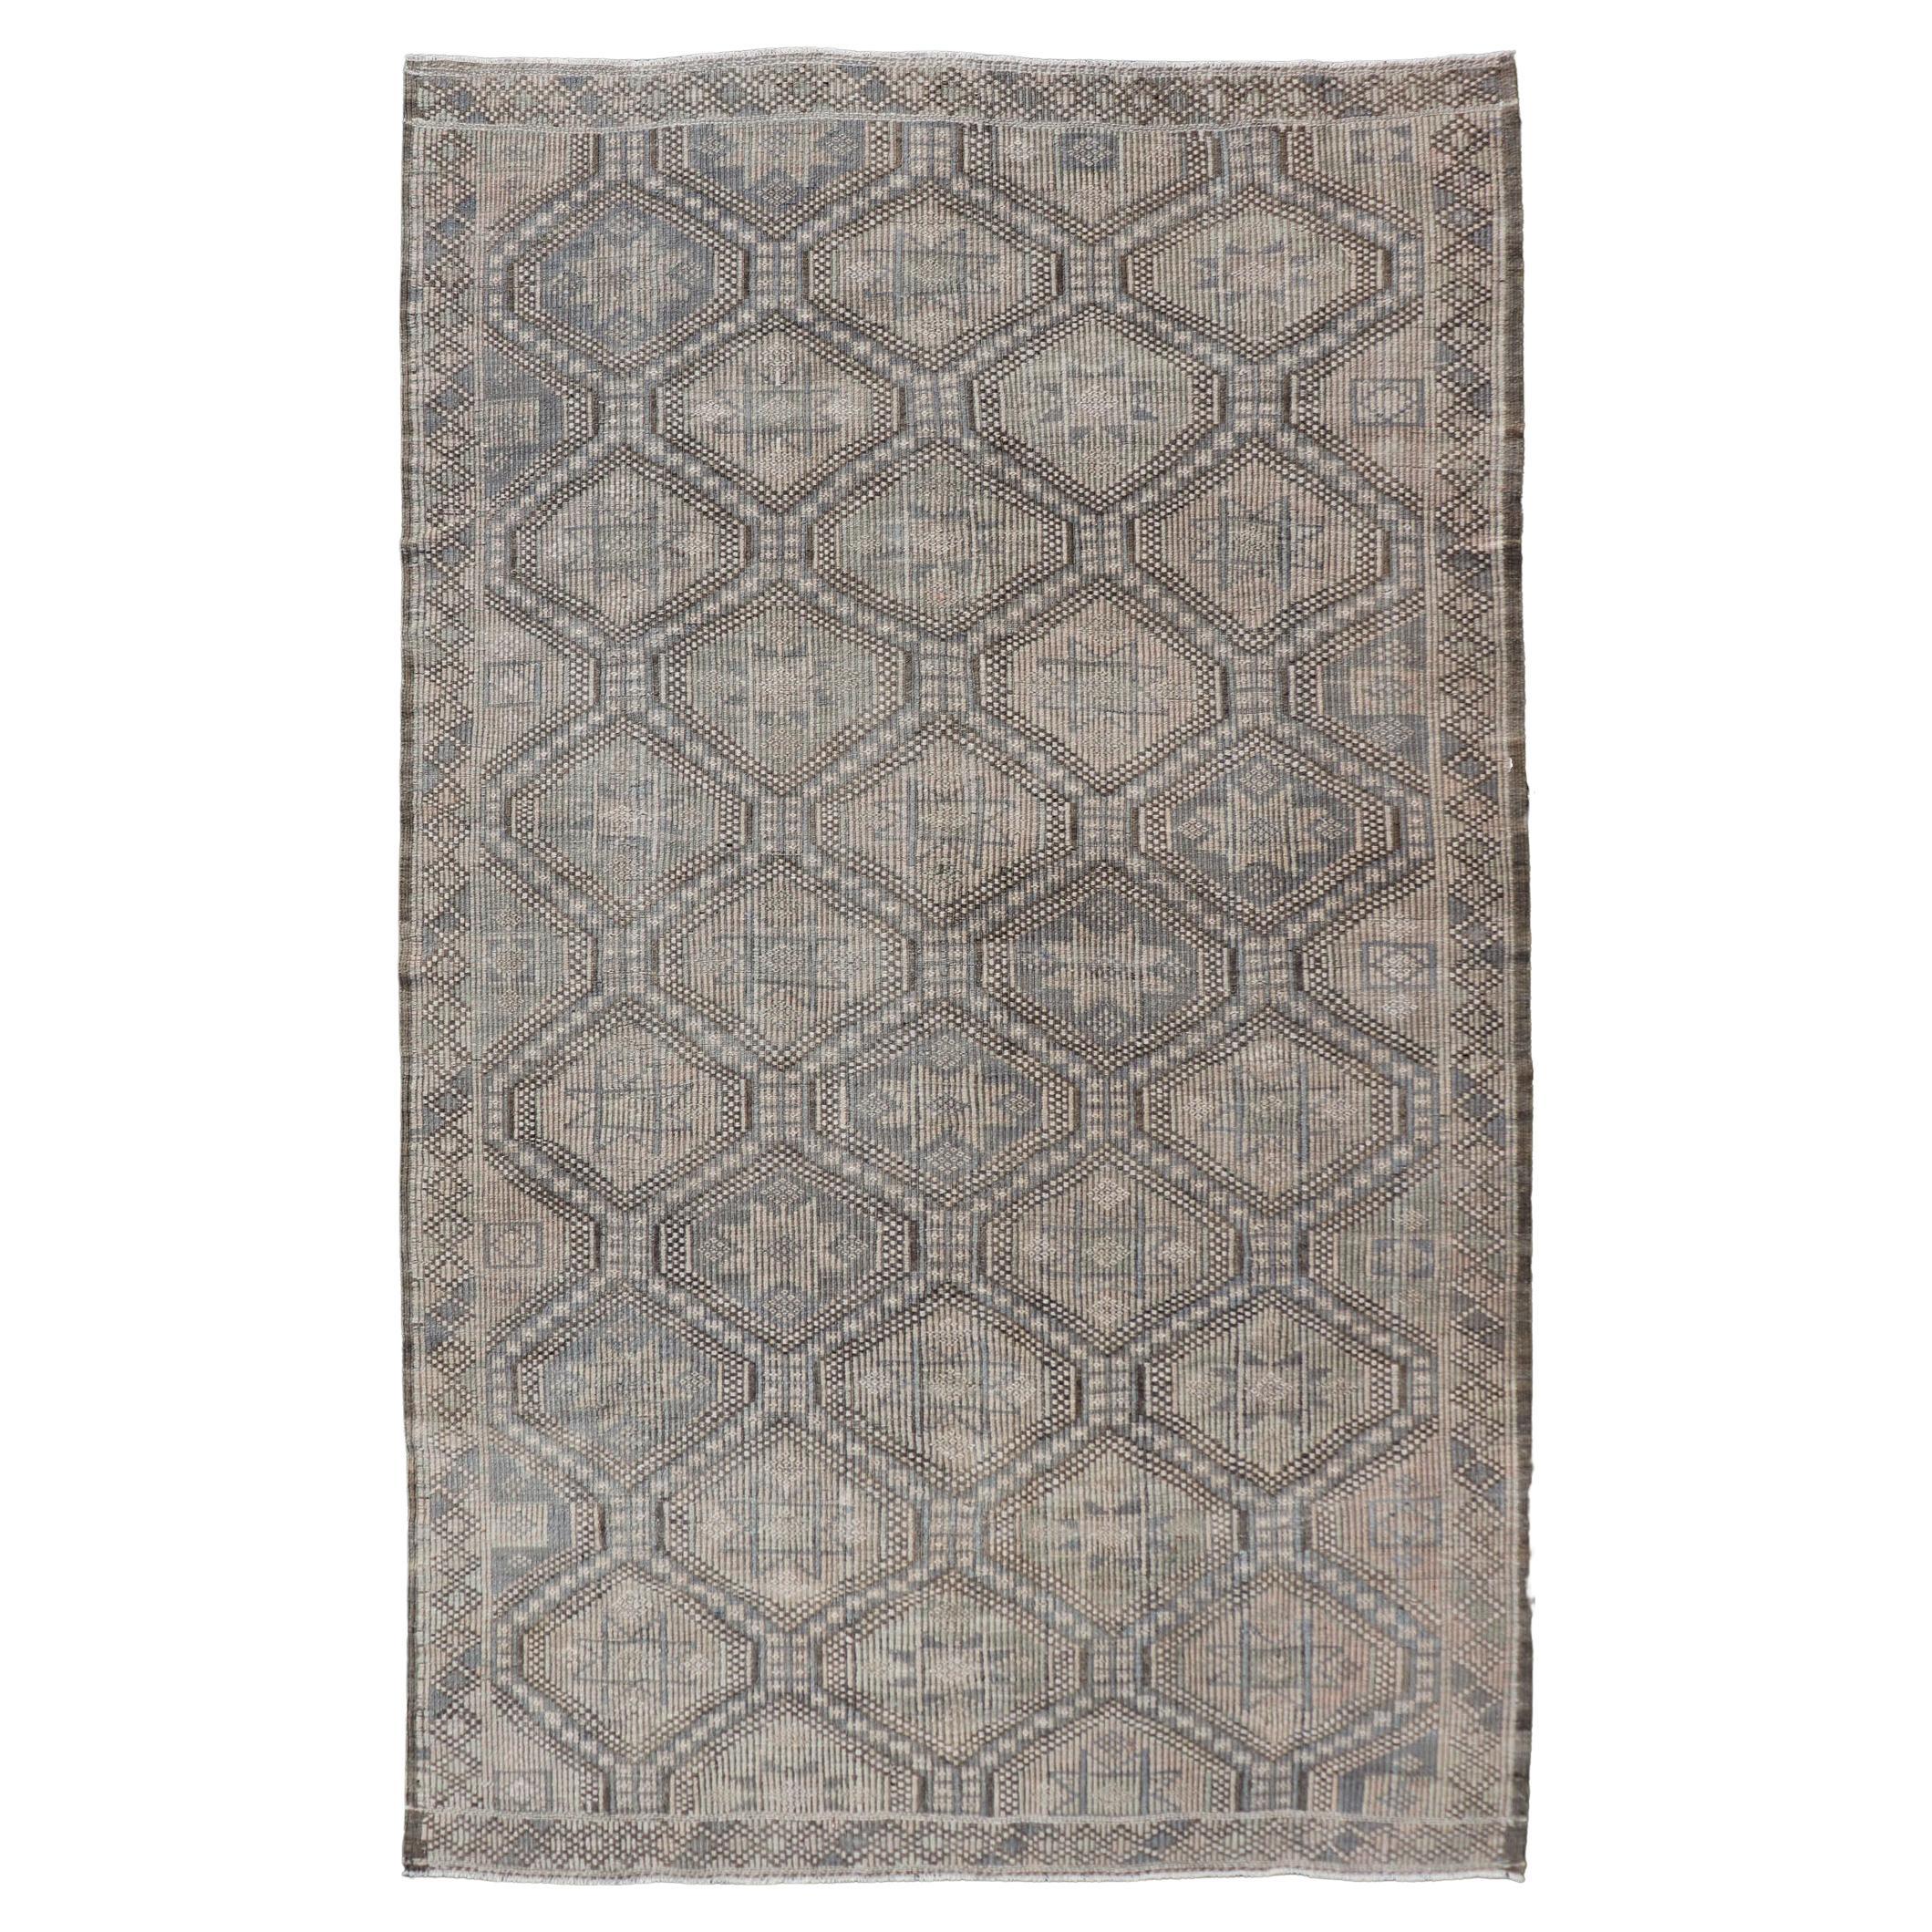 Vintage Turkish Embroidered Flat-Weave Rug with Geometric Diamond Design For Sale